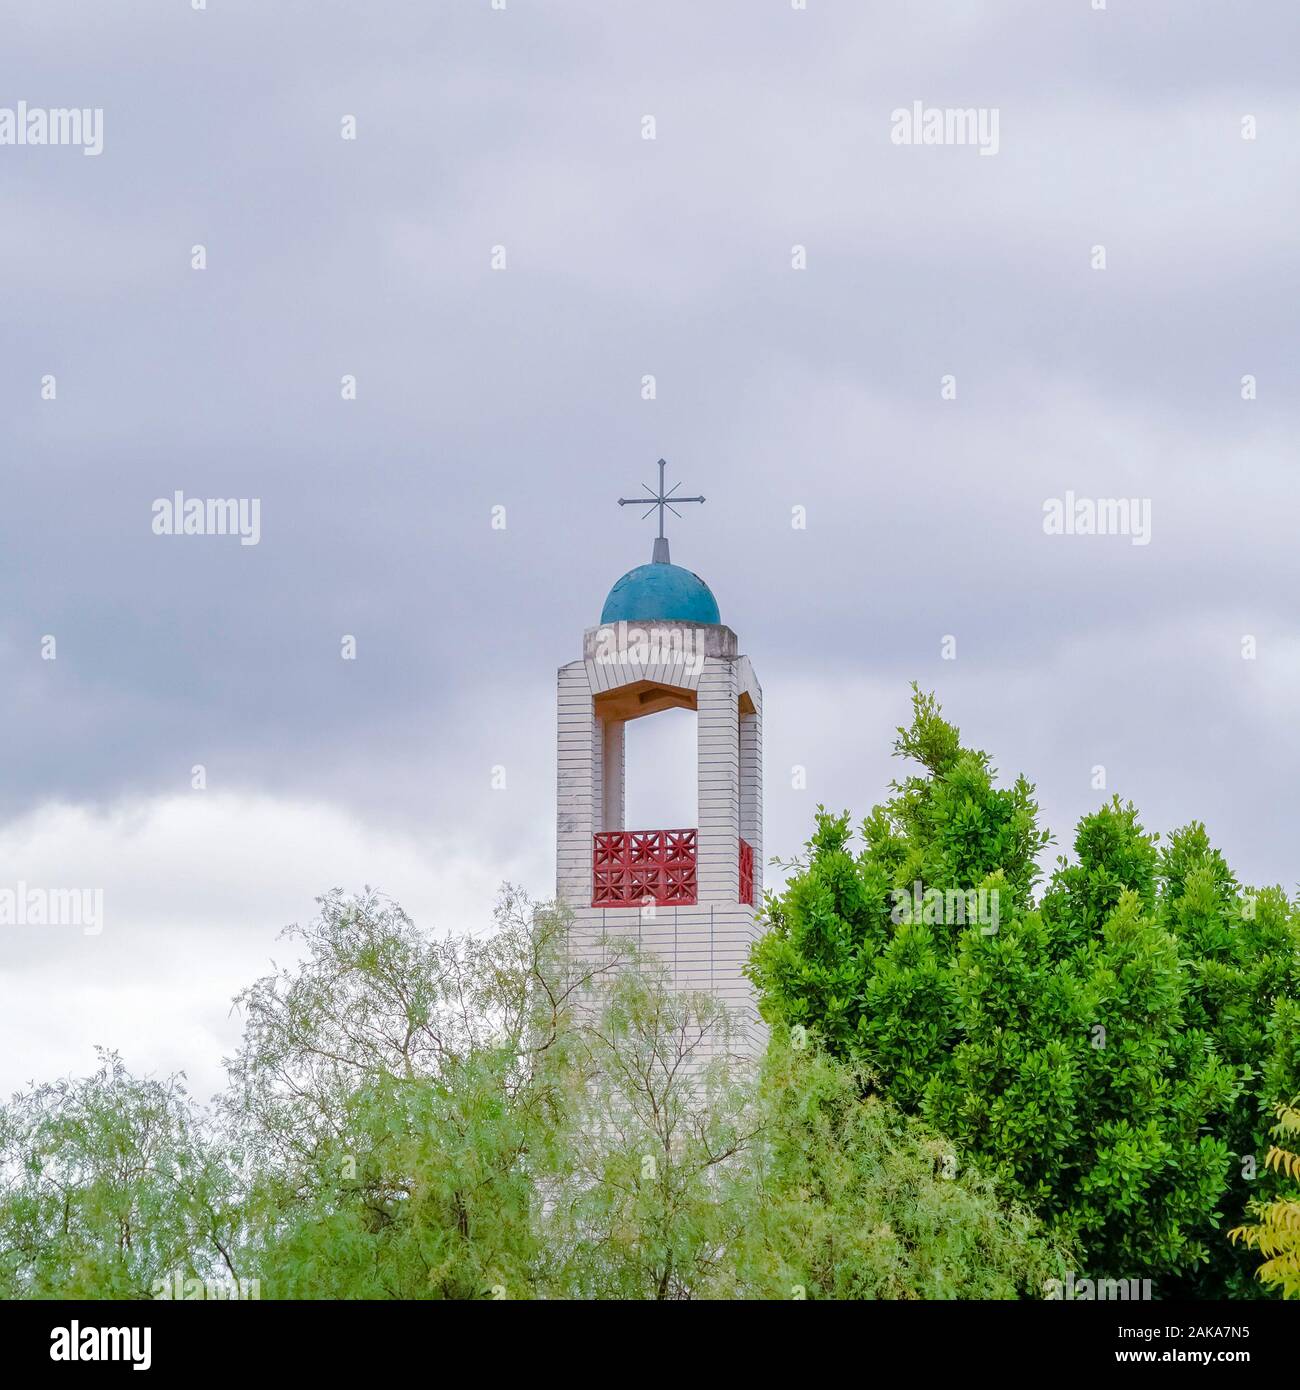 Square Bell Tower of a church rising above green trees Stock Photo